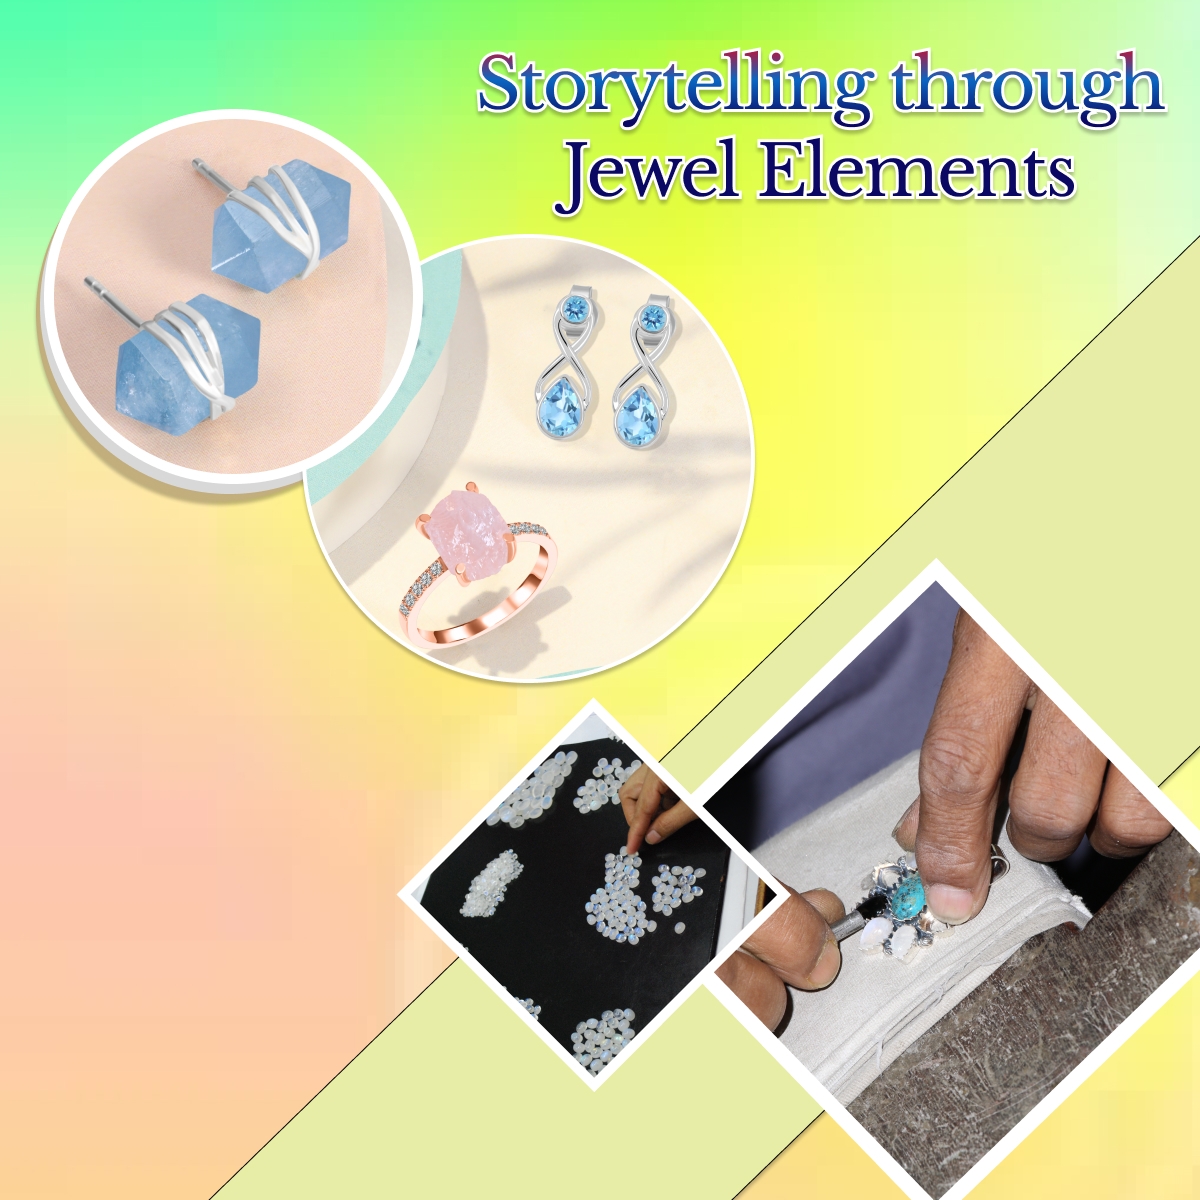 Some of the Elements of Statement Jewelry